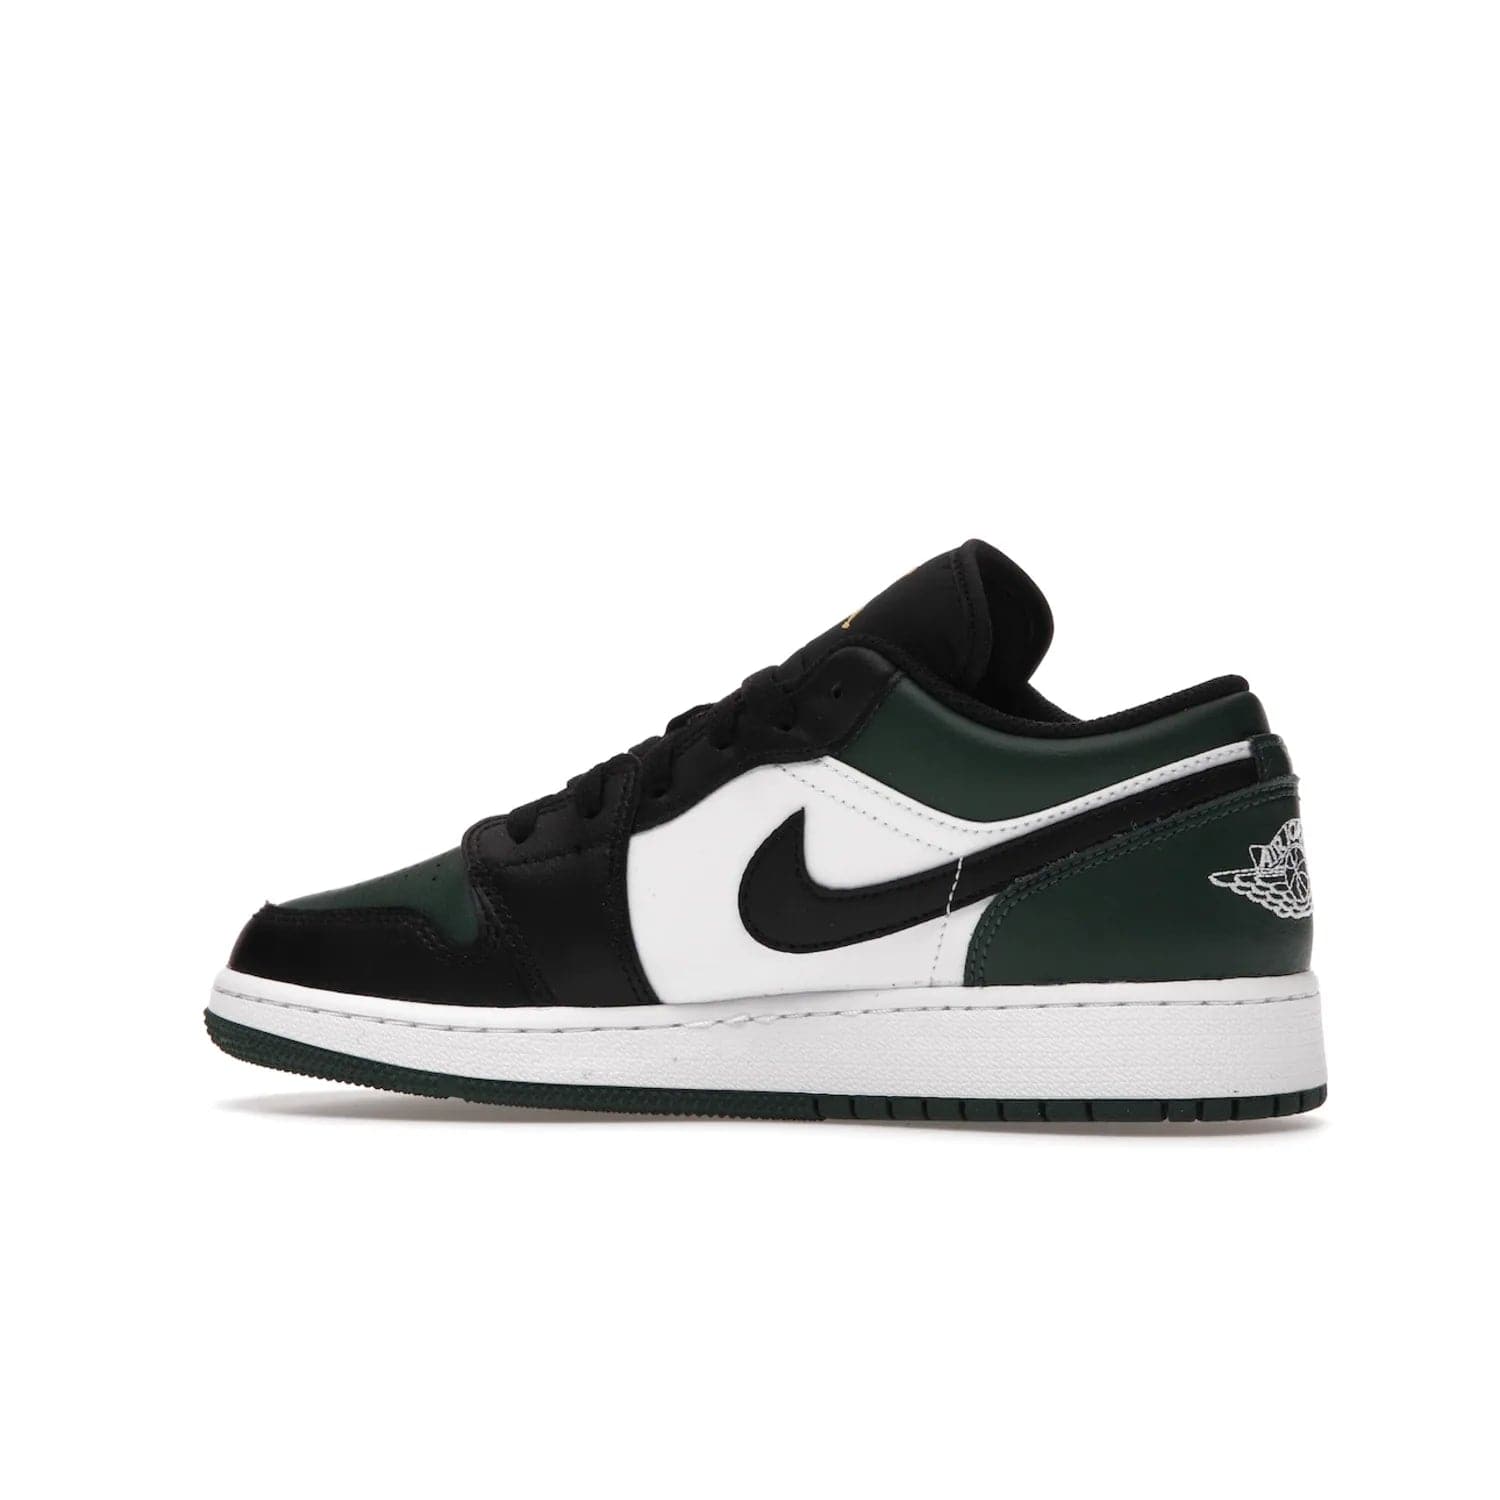 Jordan 1 Low Green Toe (GS) - Image 21 - Only at www.BallersClubKickz.com - Get the perfect low cut Jordans. Shop the Air Jordan 1 Low Noble Green GS shoes with its unique colorway and stencil Jumpman logo. Available October 2021.